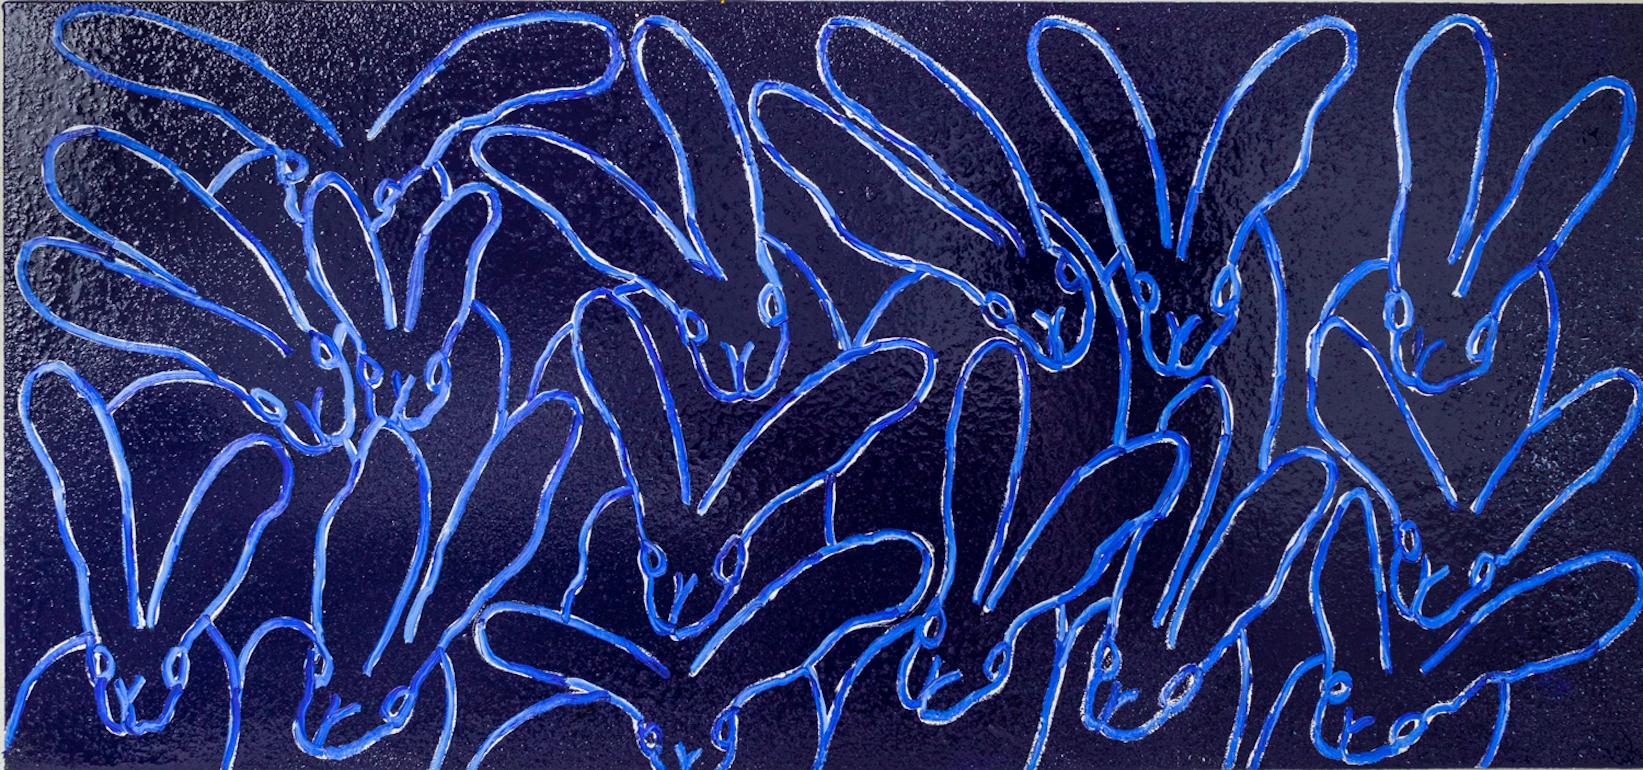 Hunt Slonem "Blue Diamond" Blue Bunnies with Diamond Dust
White outlined bunnies on a blue diamond dust background

Unframed: 28 x 60 inches

Hunt Slonem is a well-renowned American artist known for his neo-expressionist
paintings of butterflies,